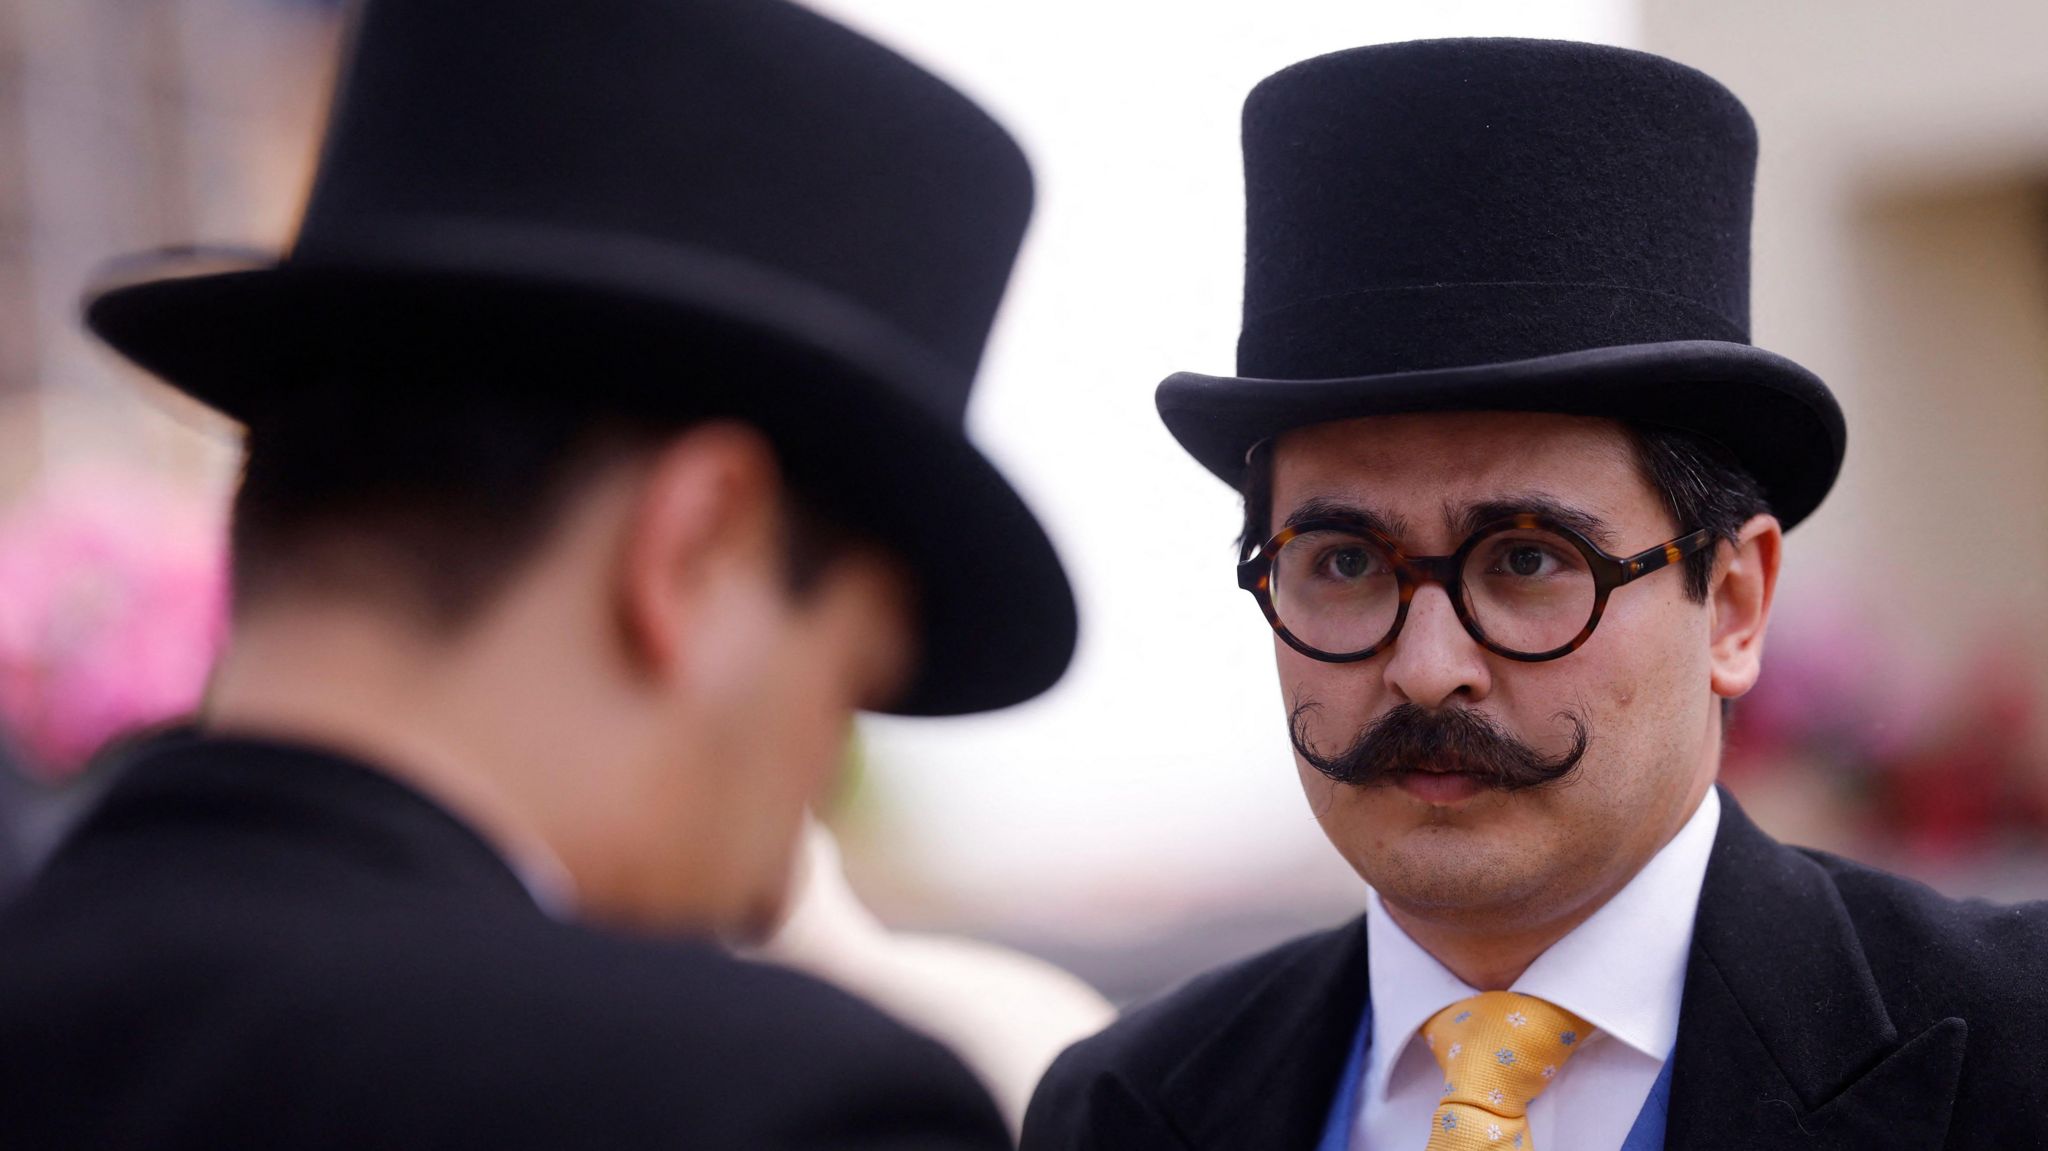 Two men wearing top hats, one facing the camera wearing round thick-framed glasses and a curled moustache